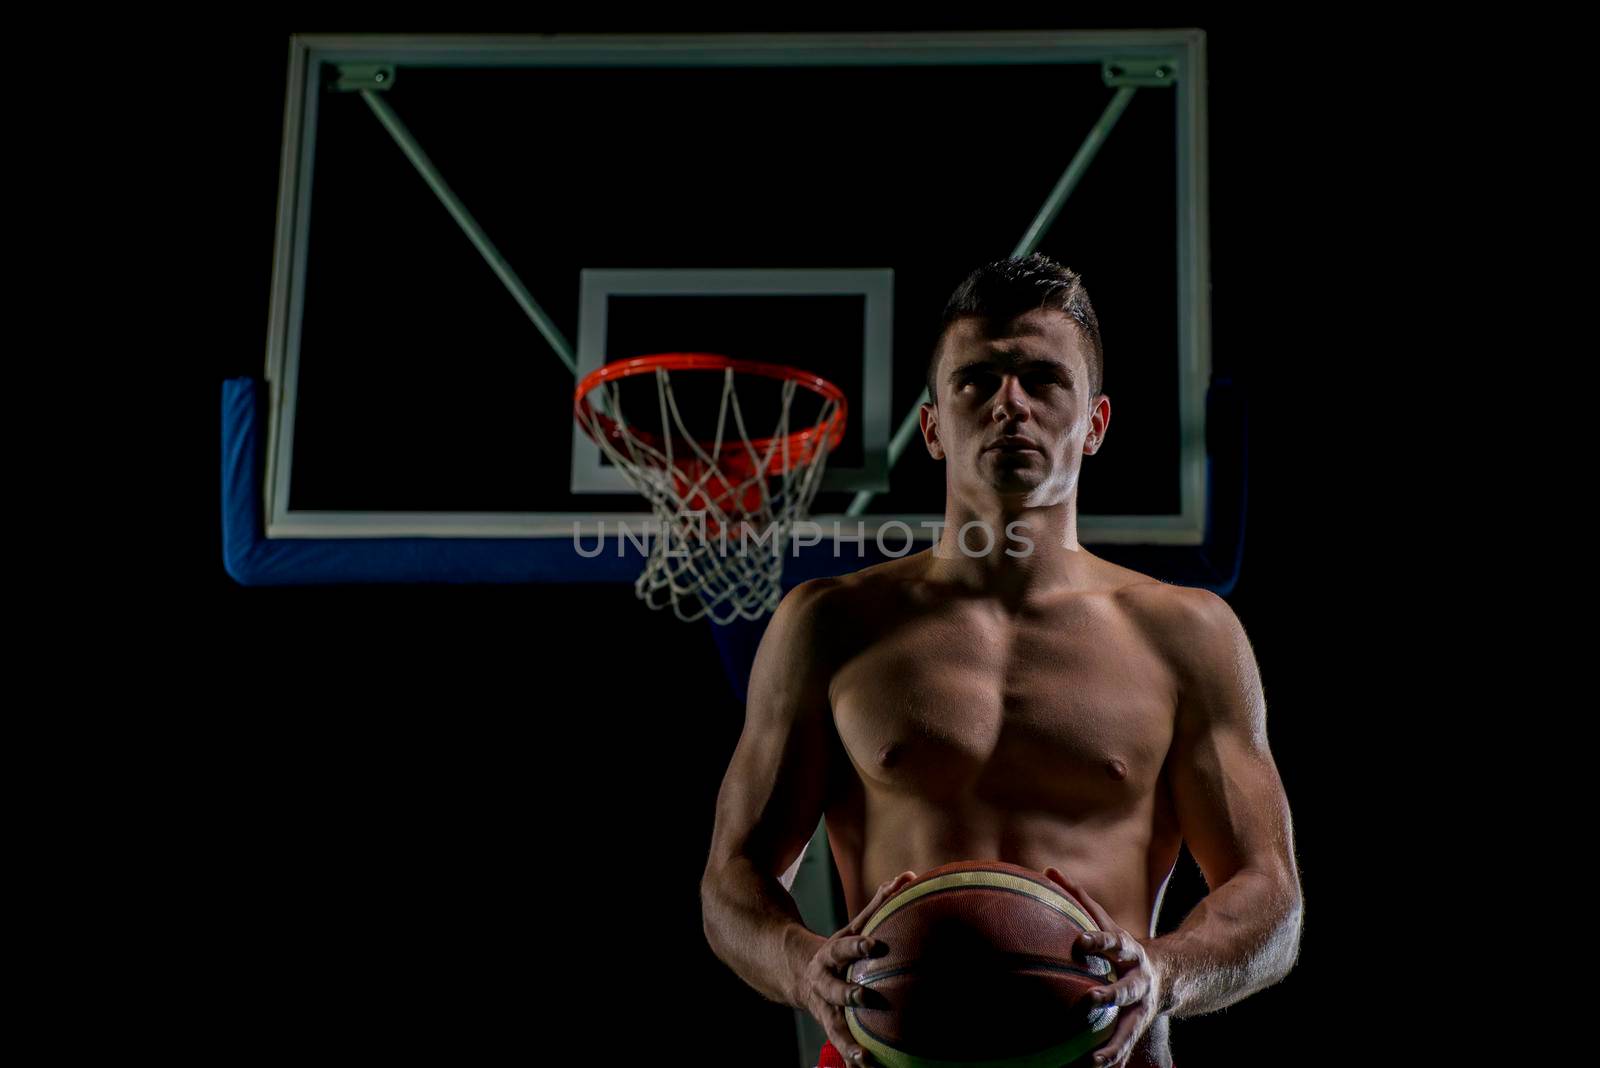 Basketball player portrait  on basketball court holding ball with black isolated background